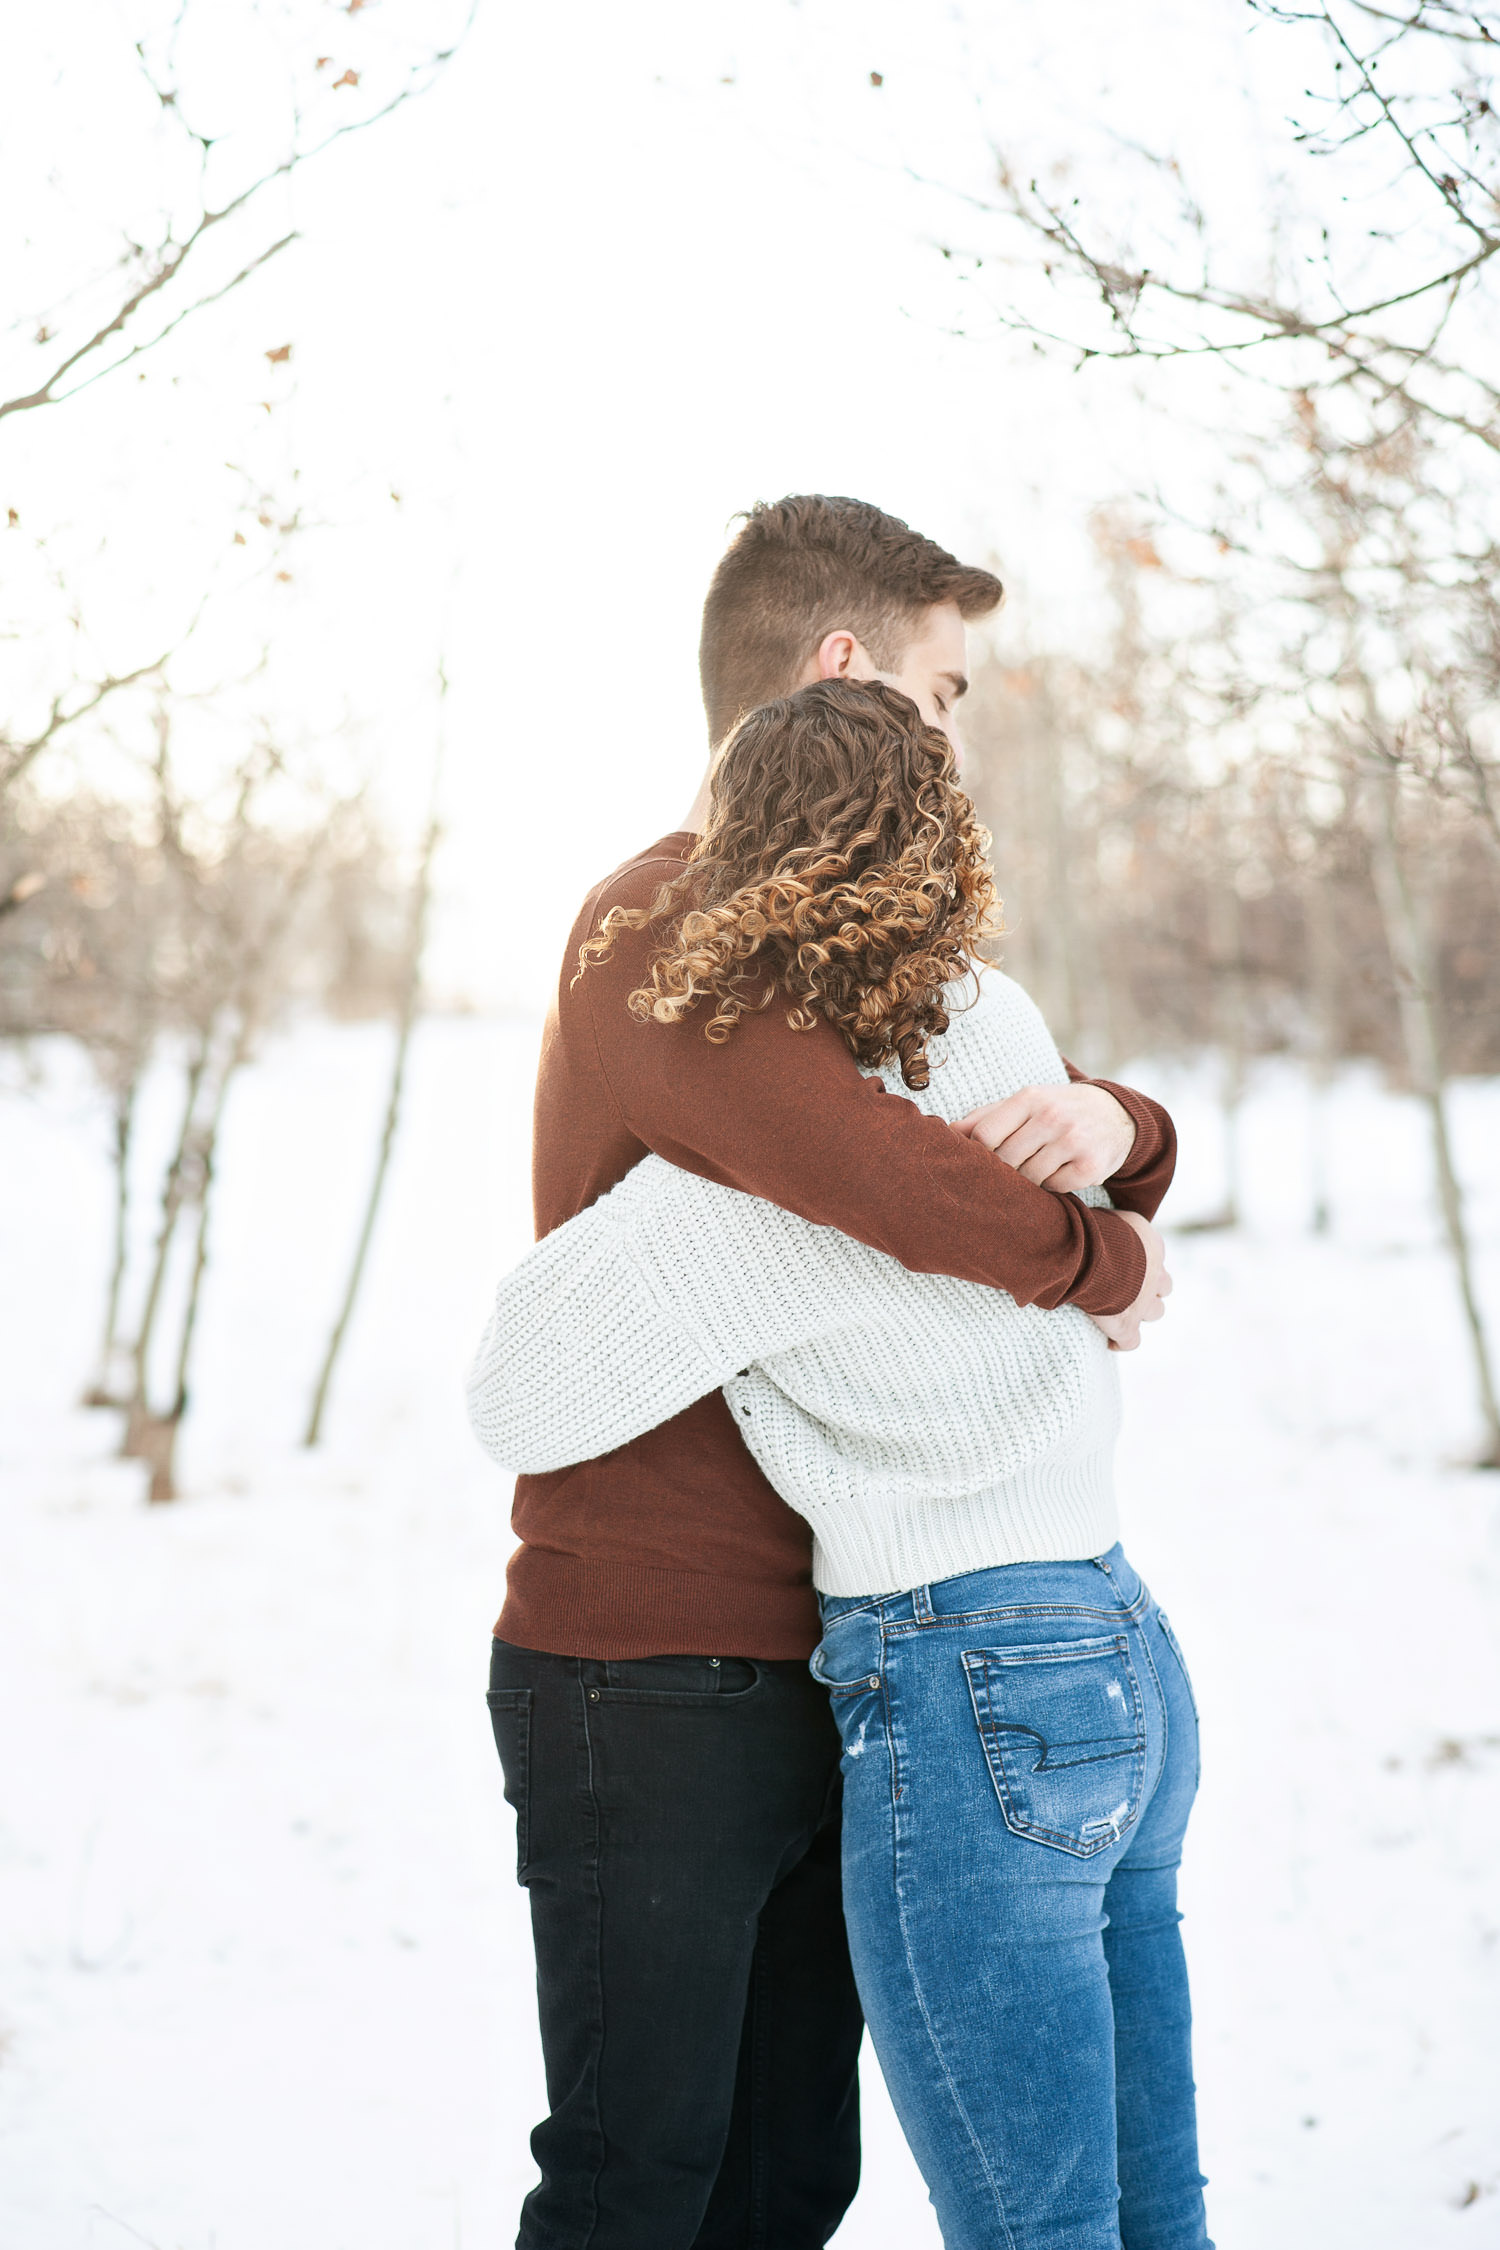 Hugs during their winter engagement session captured by Tara Whittaker Photography